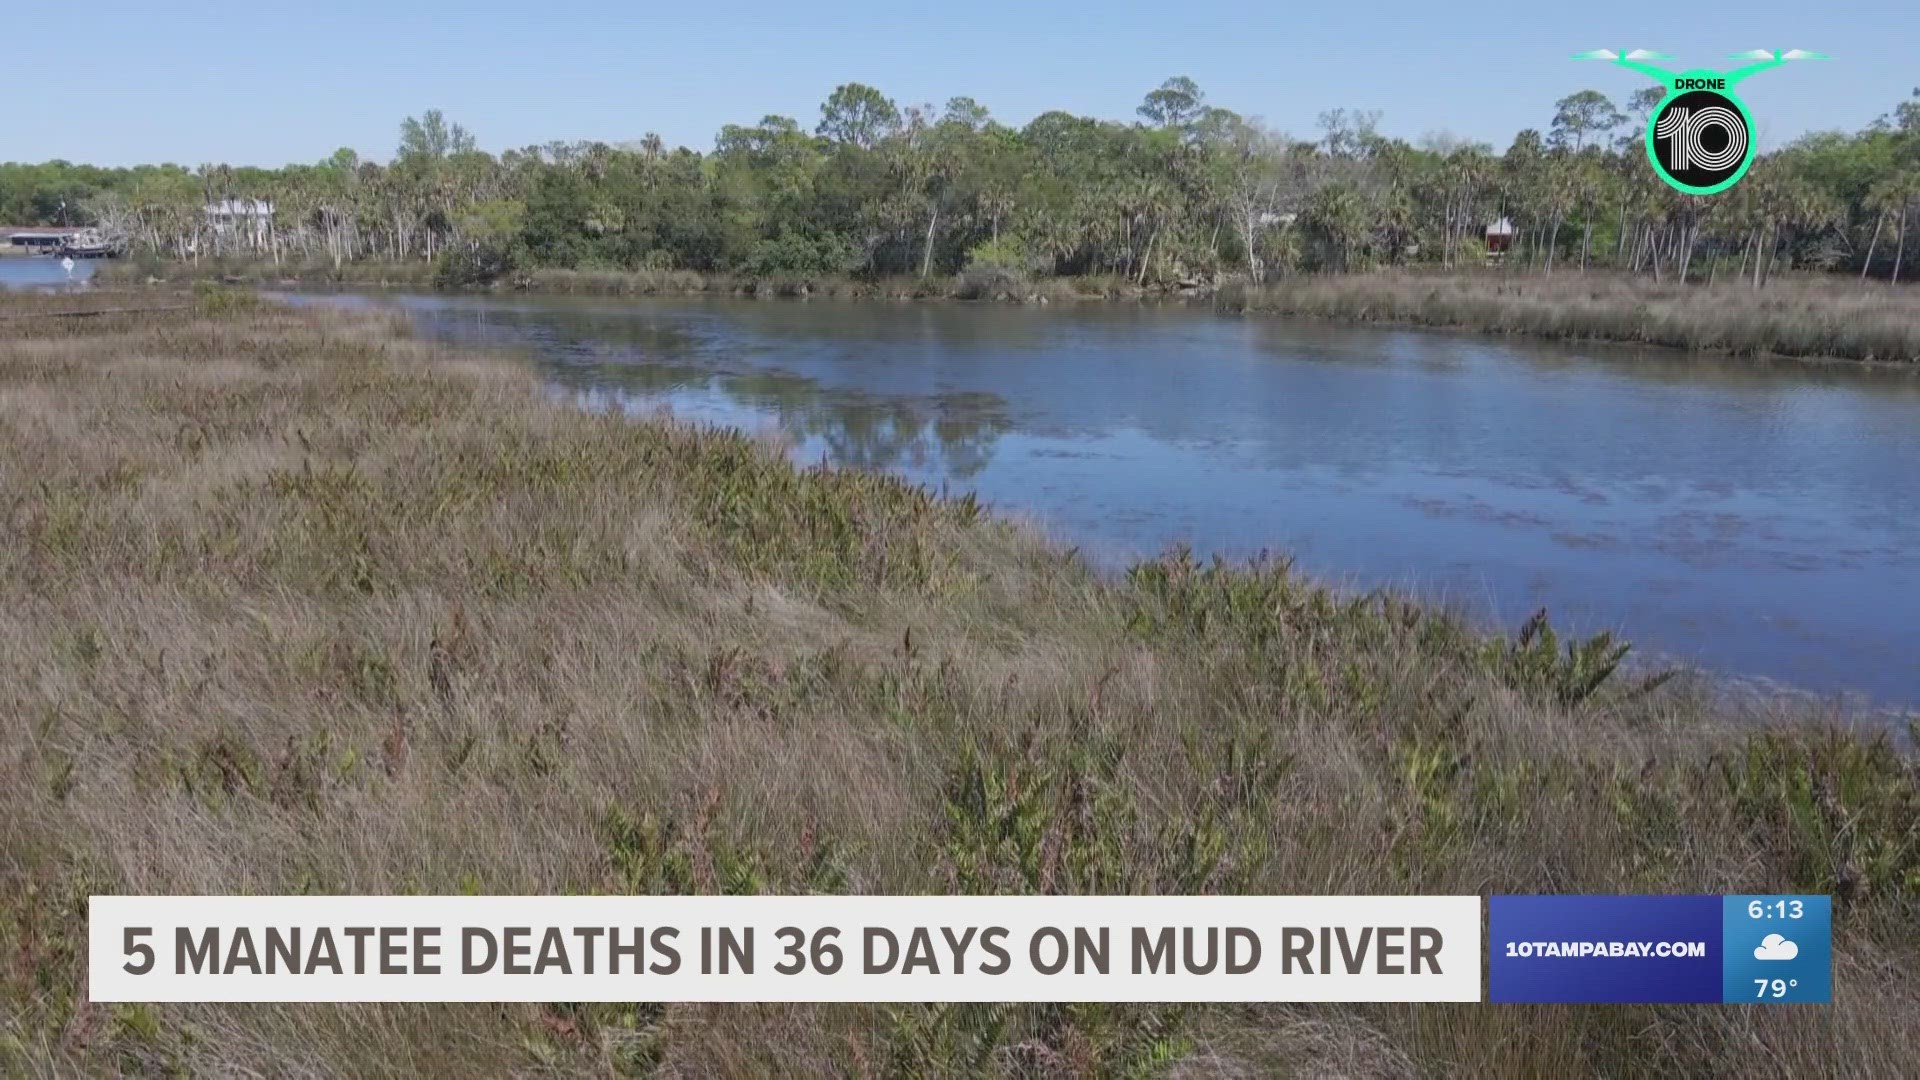 Those who live along the river say they are saddened by the manatee deaths, but they are not surprised due to the lack of sea grass and other challenges.